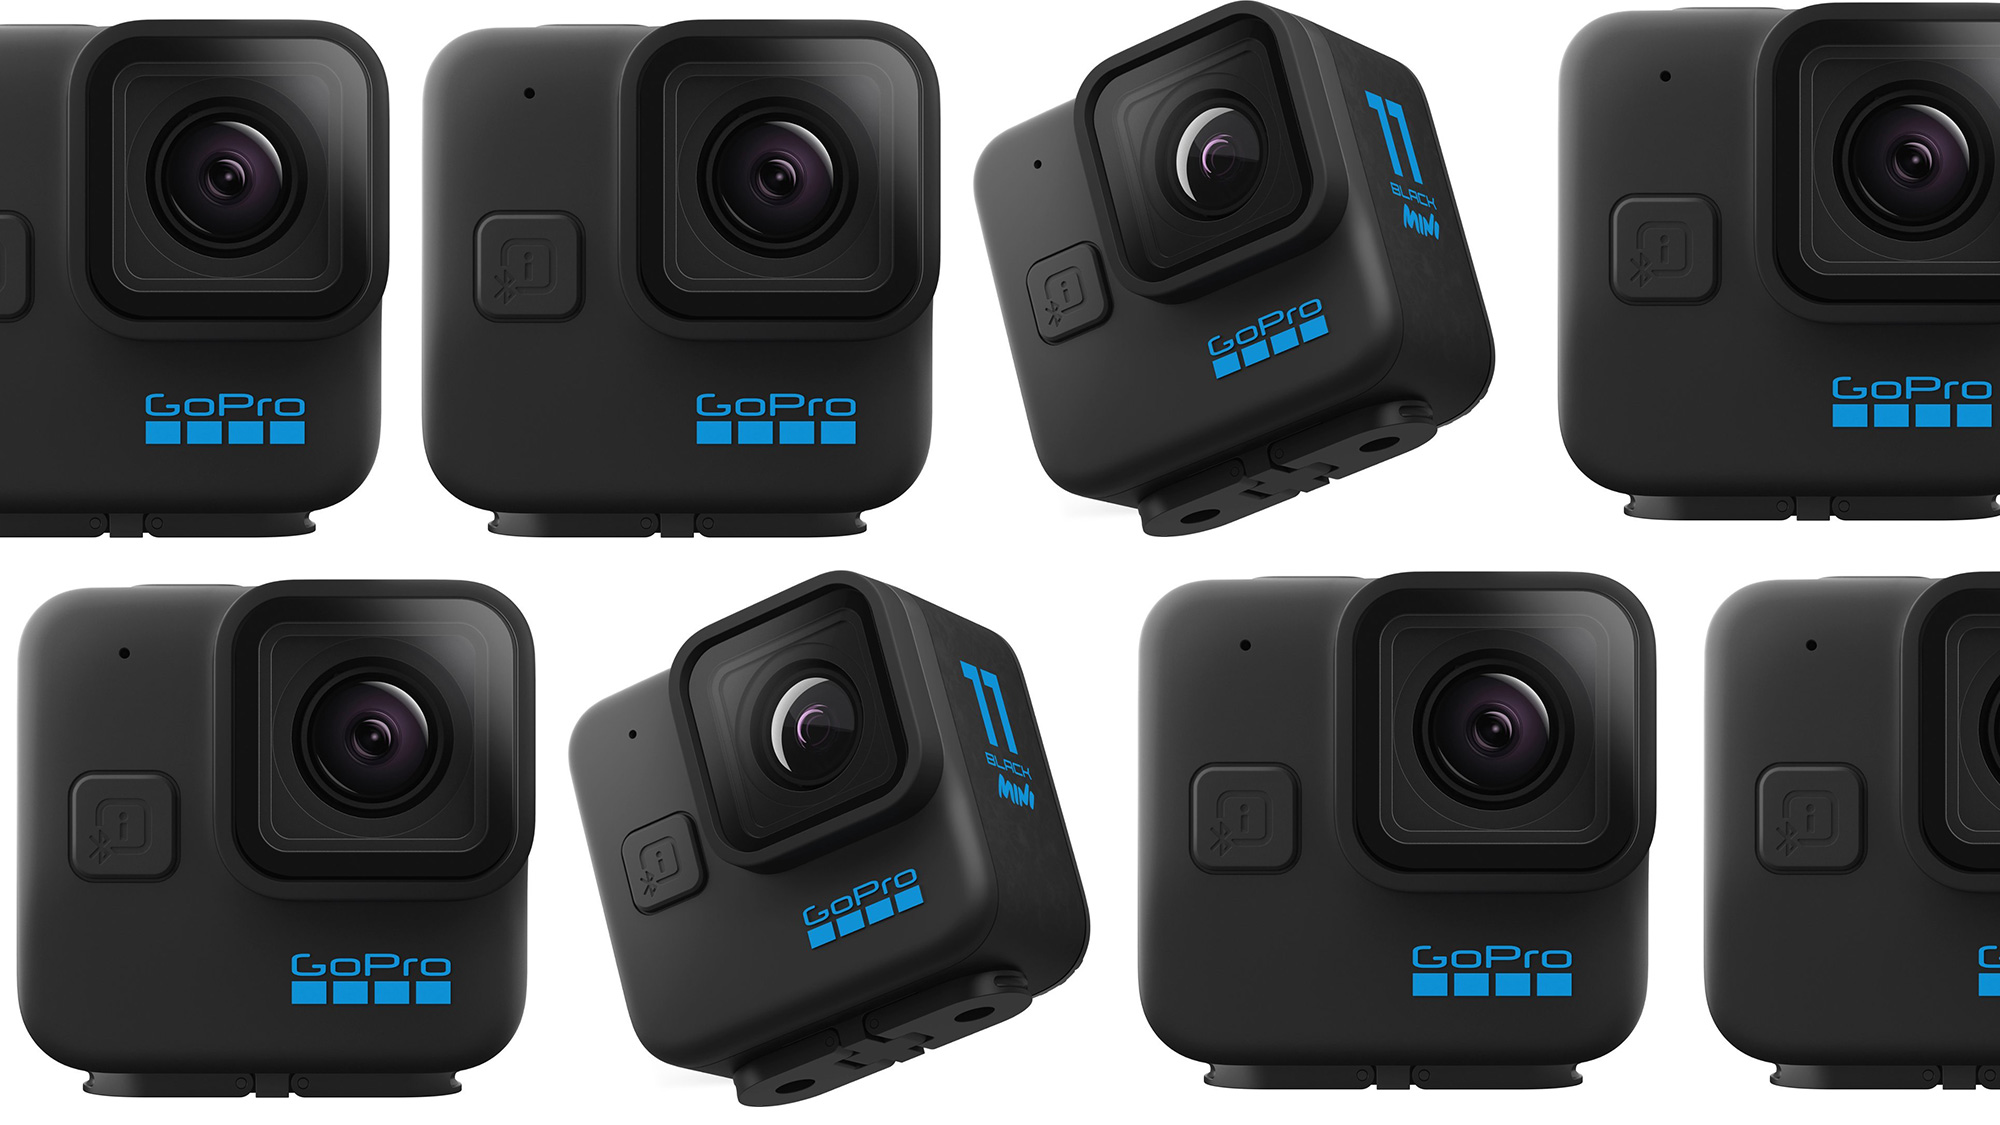 Surprise! The GoPro Hero 11 Black Mini is now shipping